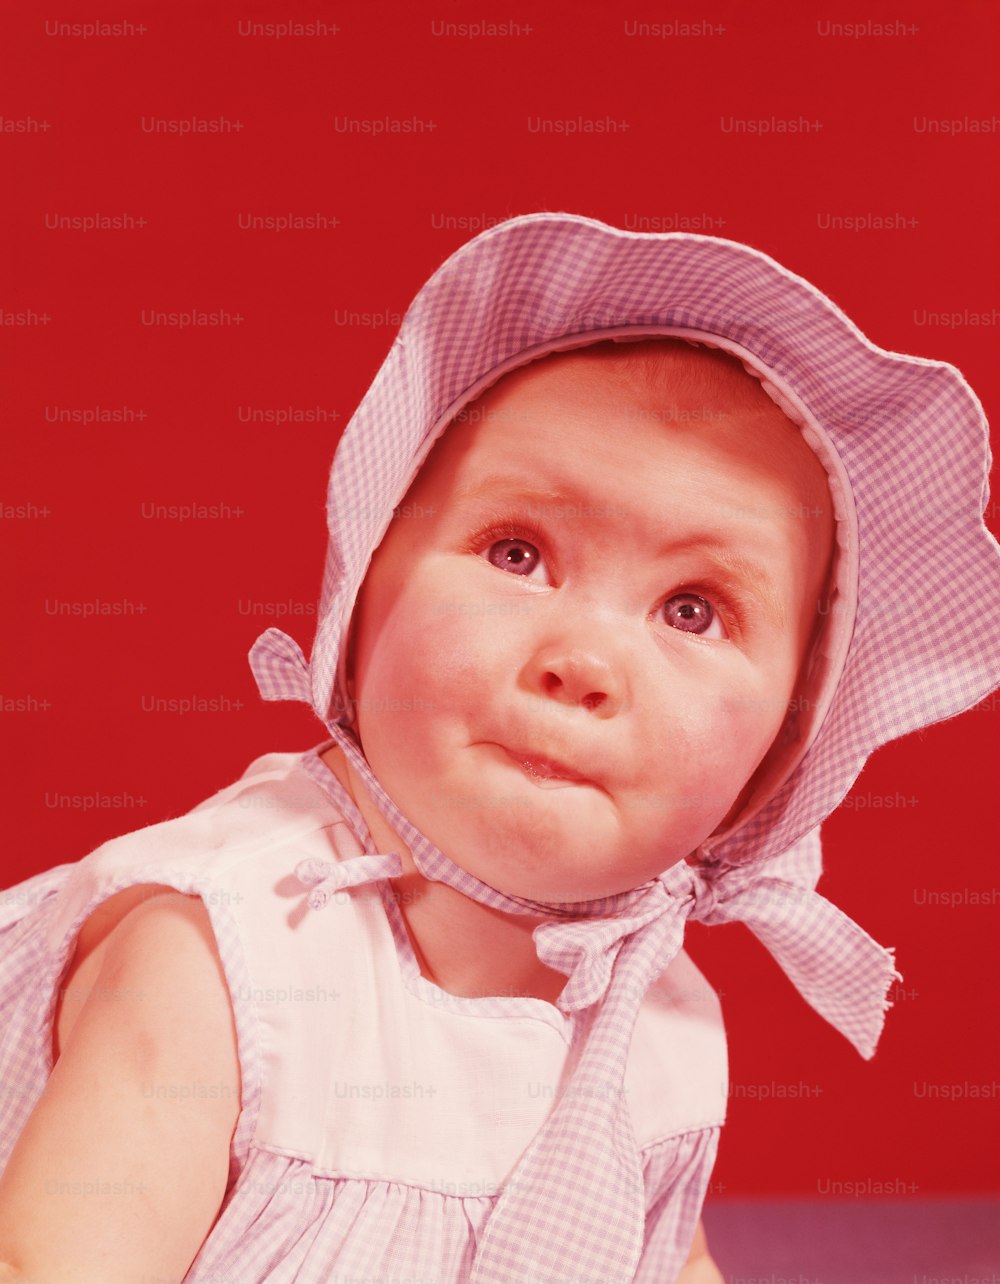 UNITED STATES - CIRCA 1950s:  Baby girl wearing bonnet and sundress, portrait.